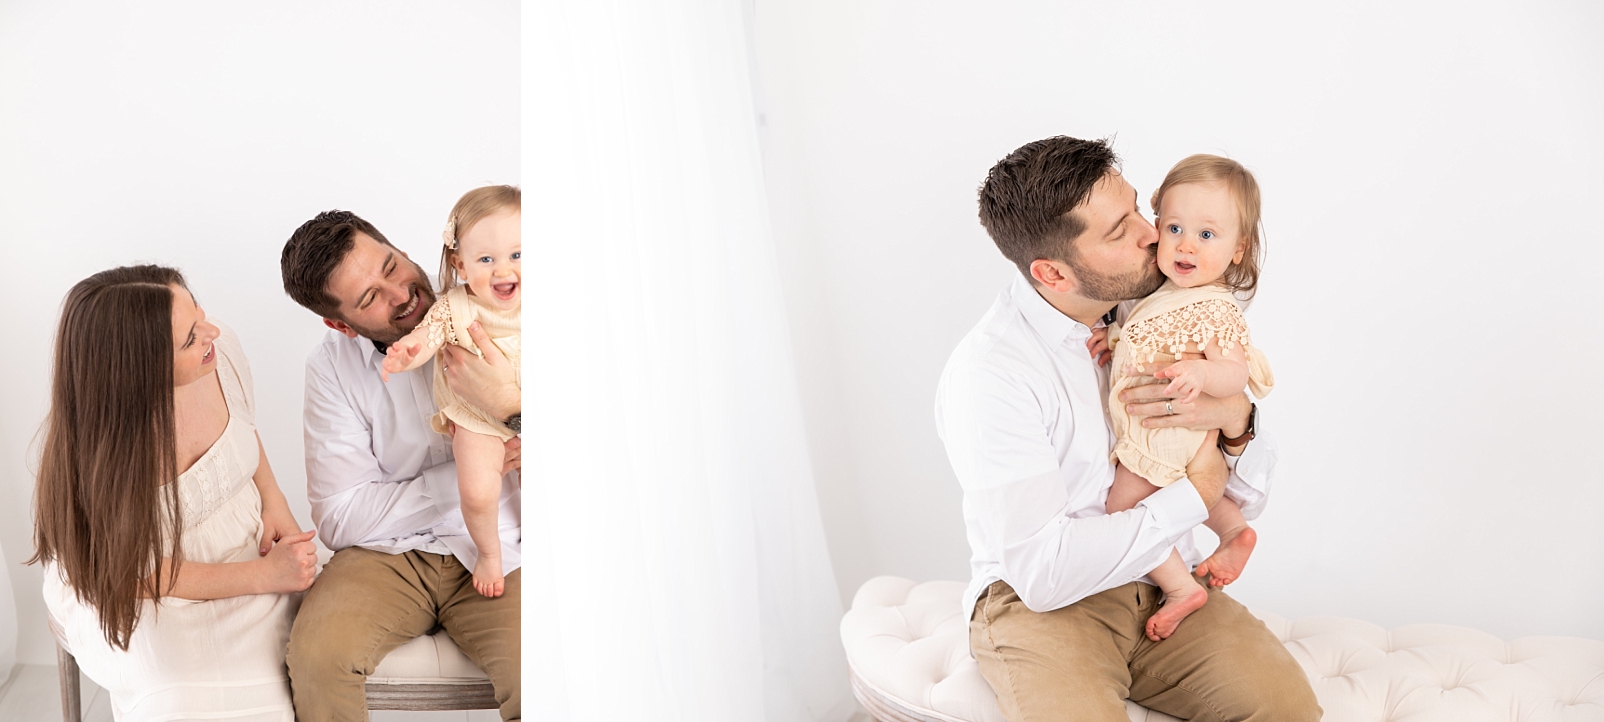 Parents holding 1 year old for first birthday portraits
